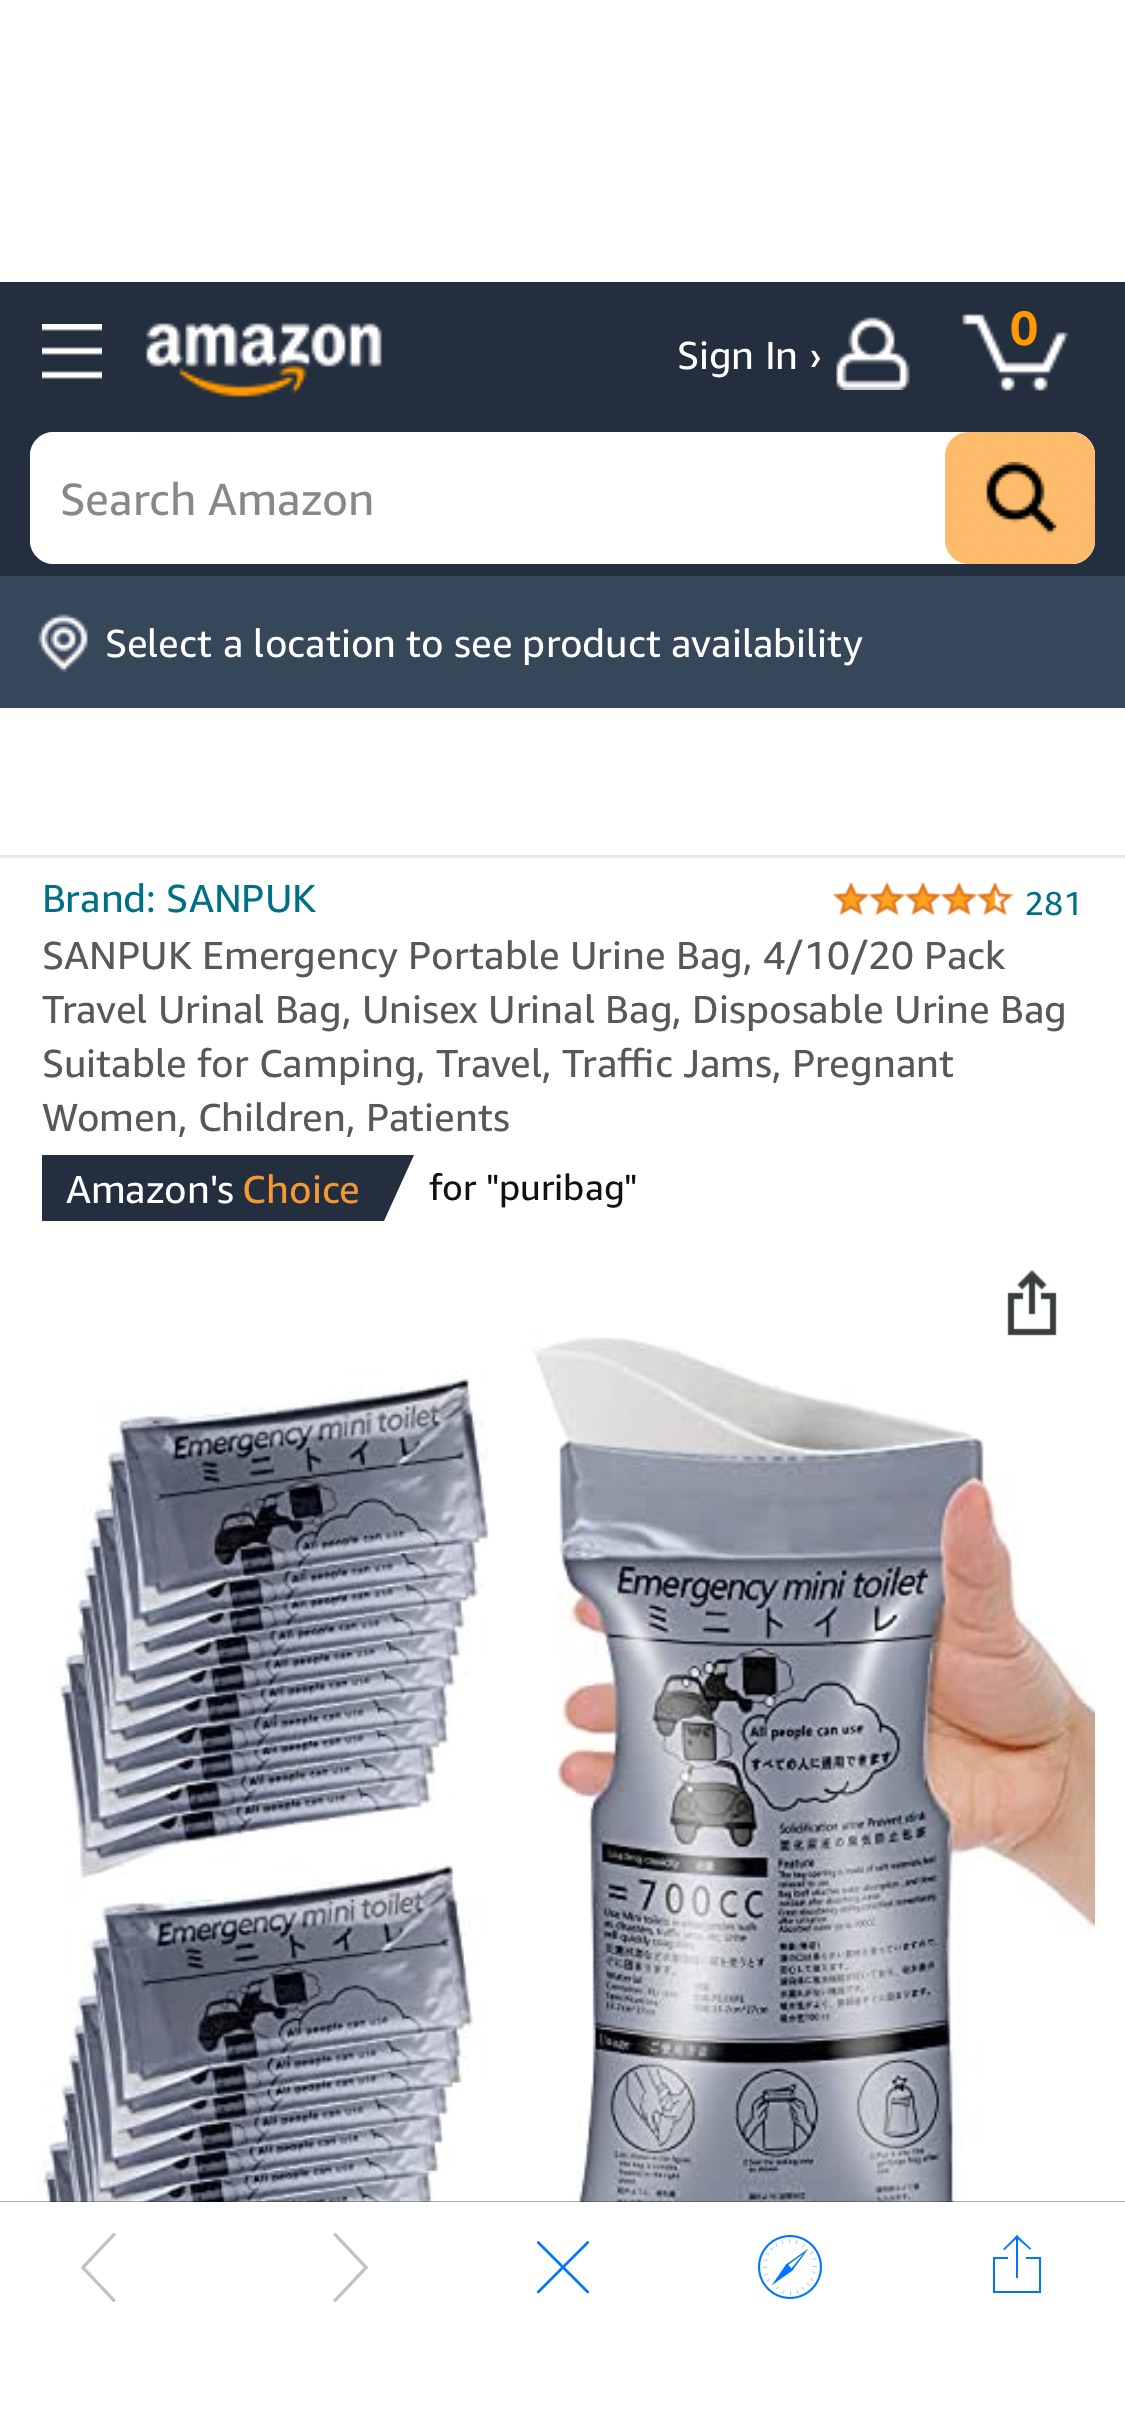 SANPUK Emergency Portable Urine Bag, 20 Pack Travel Urinal Bag, Unisex Urinal Bag, Disposable Urine Bag Suitable for Camping, Travel, Traffic Jams, Pregnant Women, Children, Patients